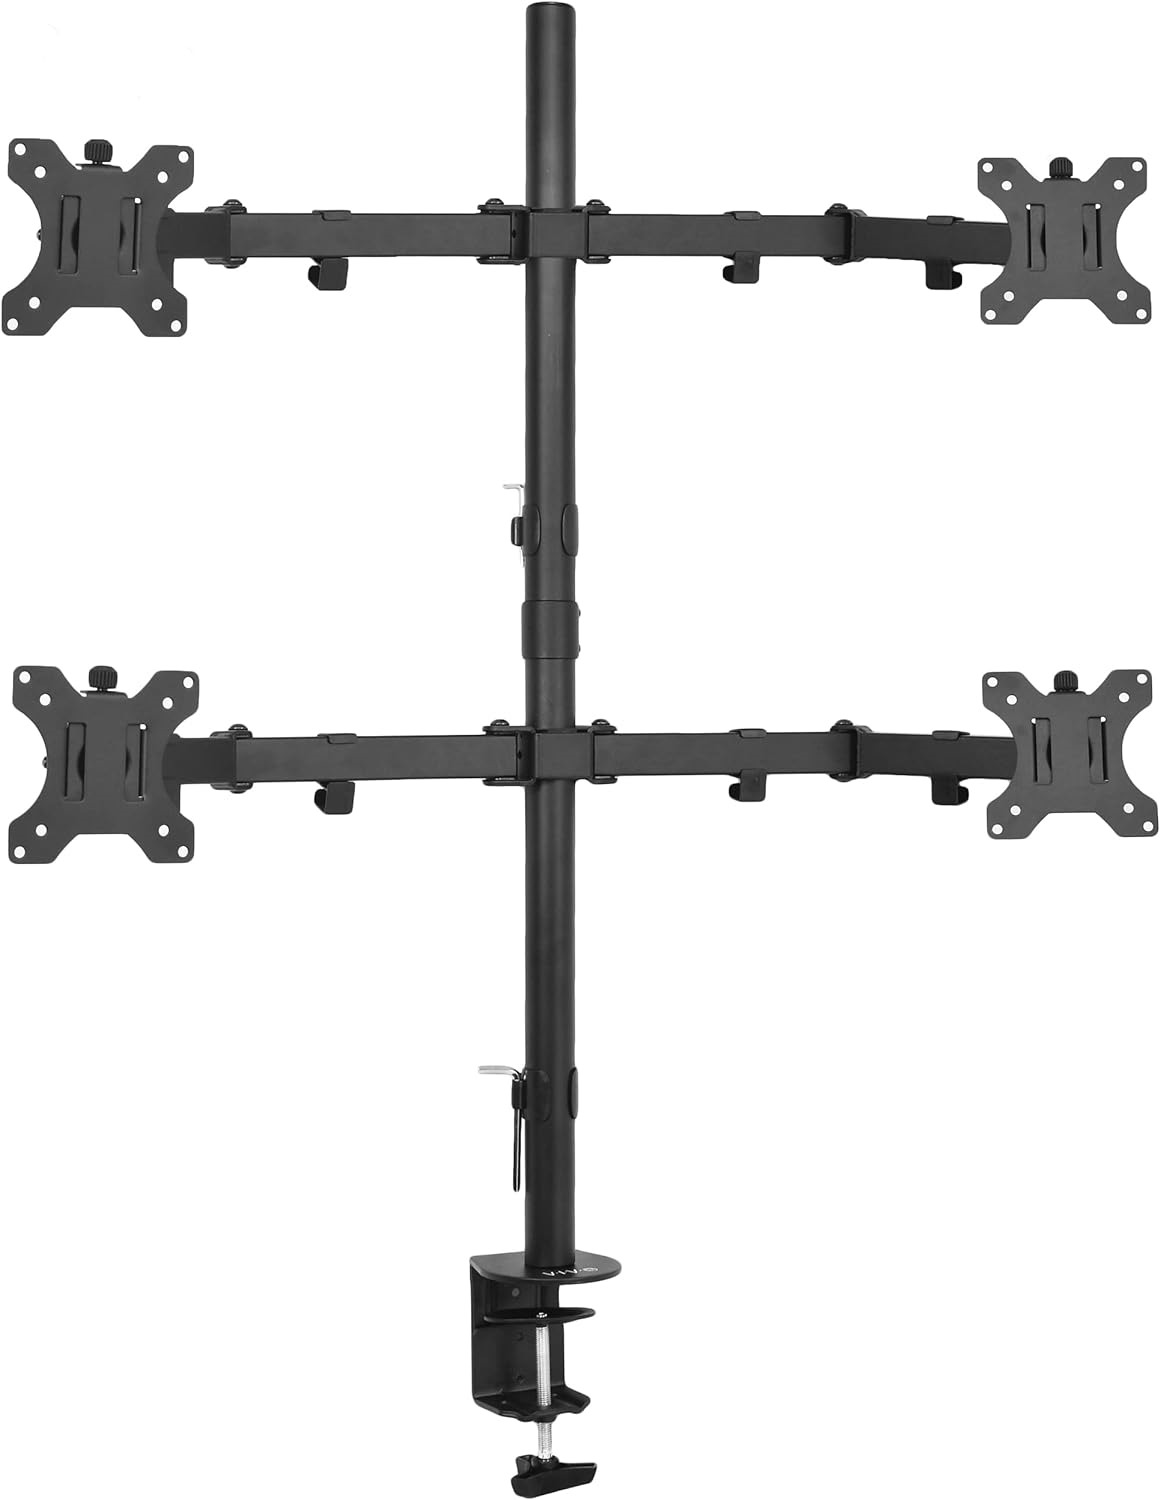 VIVO Quad 13 to 30 inch LCD Monitor Desk Mount, Fully Adjustable Stand with Til